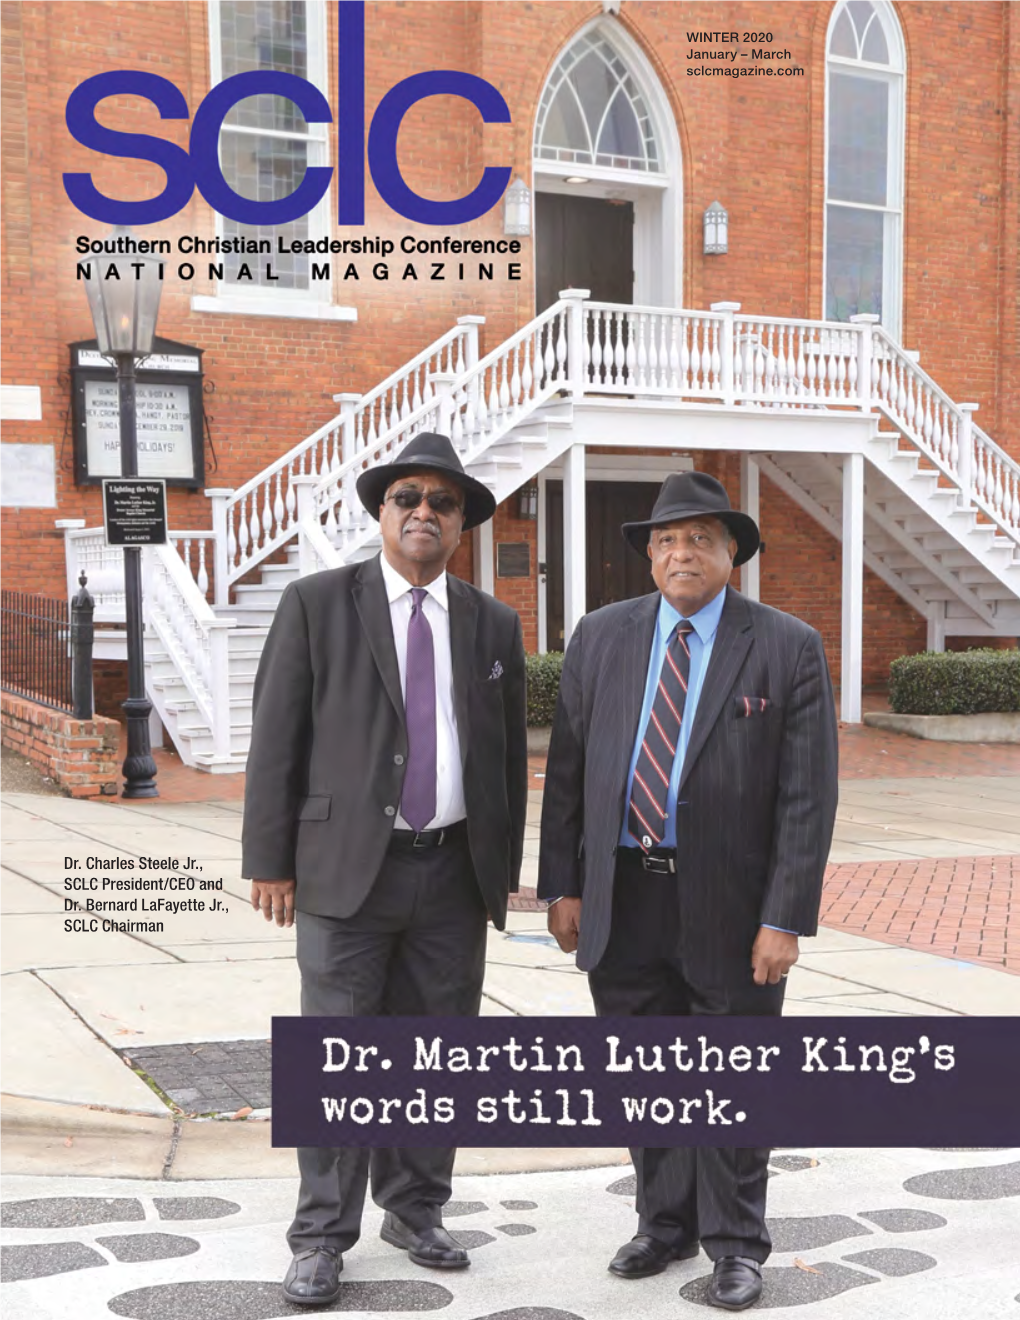 Dr. Charles Steele Jr., SCLC President/CEO and Dr. Bernard Lafayette Jr., SCLC Chairman